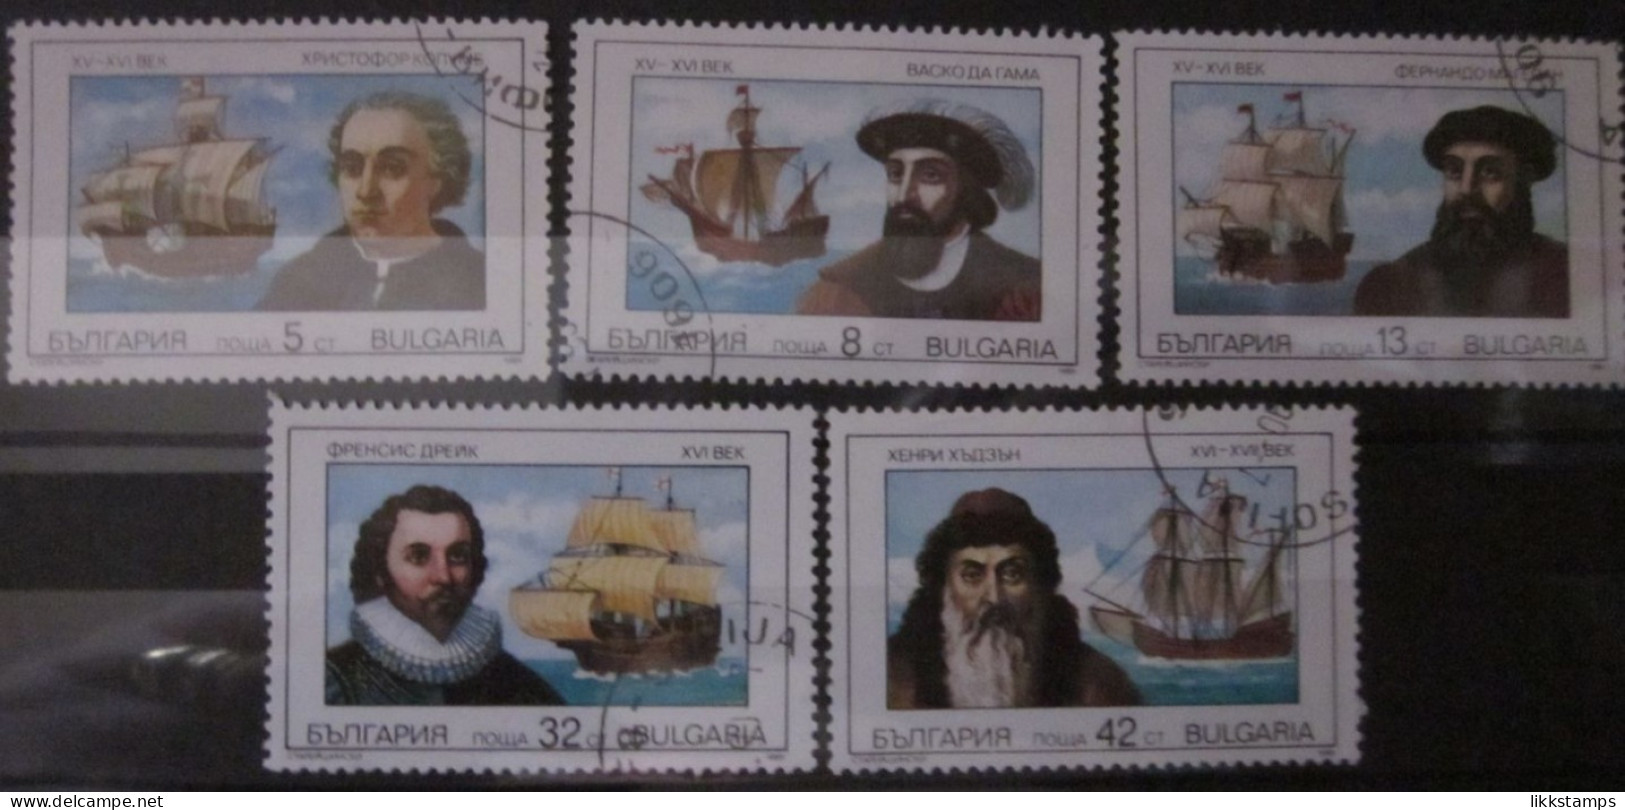 BULGARIA 1990 ~ S.G. 3664 - 3668, ~ NAVIGATORS AND THEIR SHIPS. ~  VFU #02911 - Used Stamps